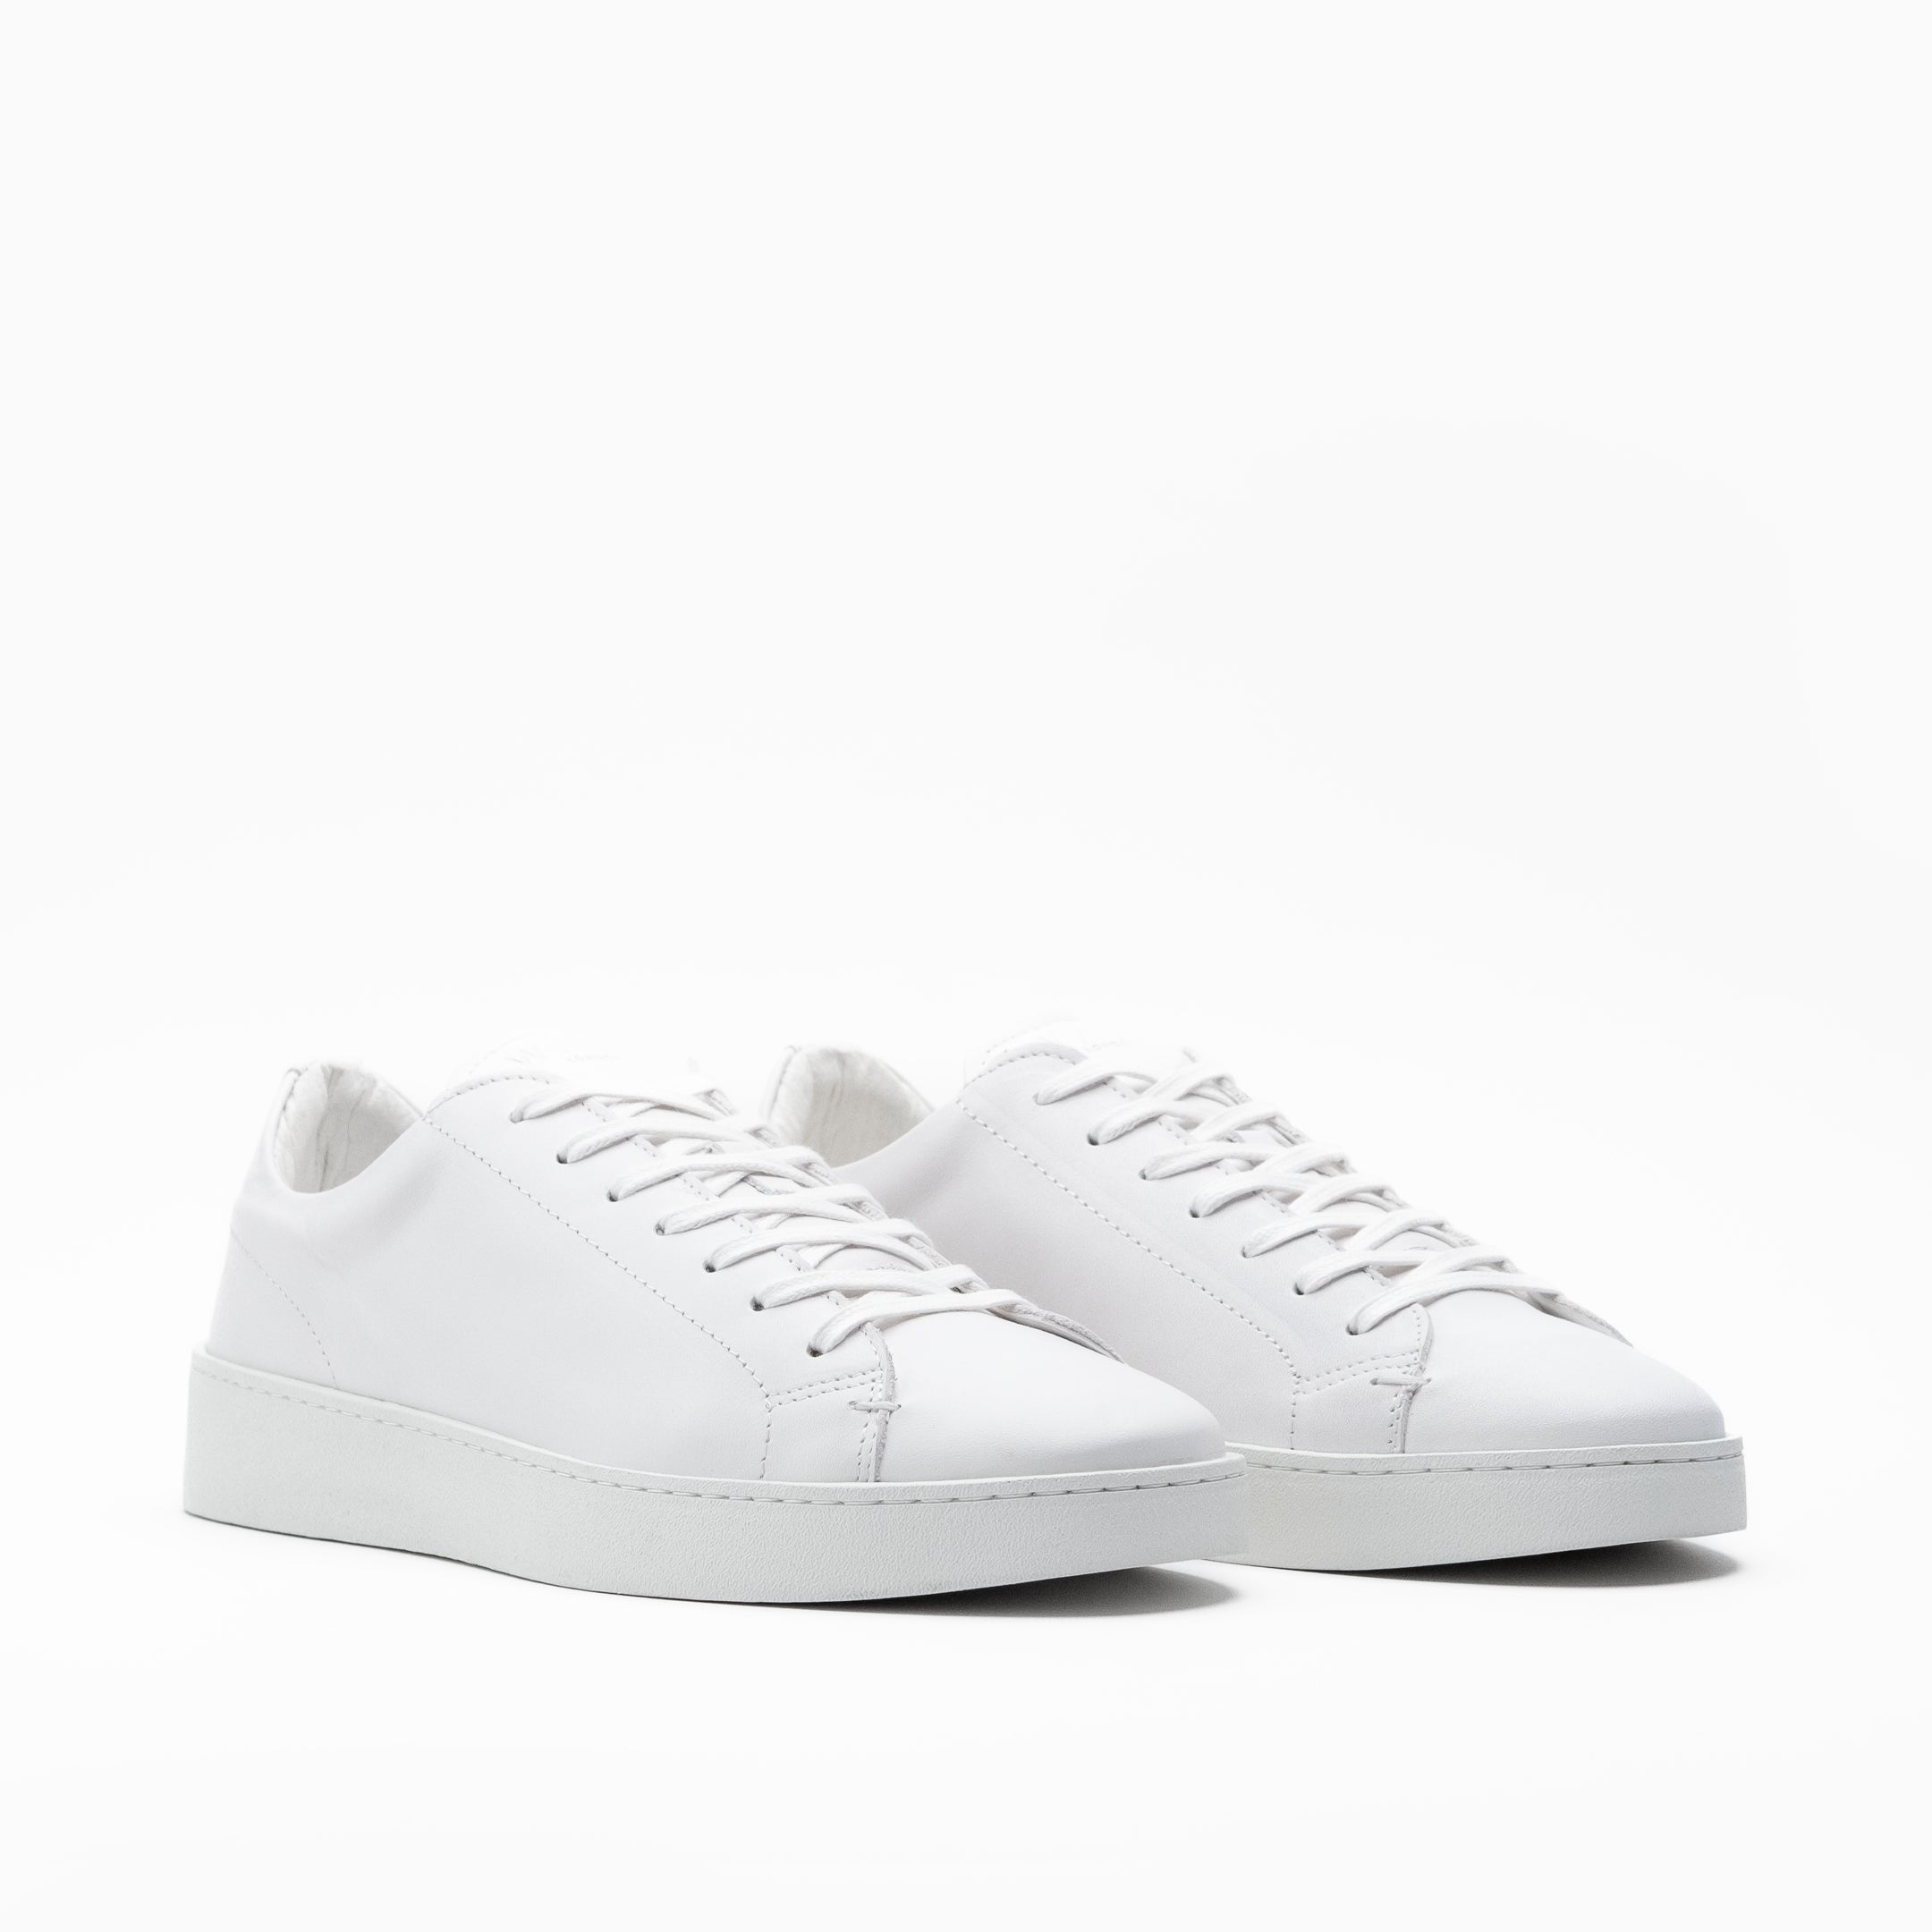 Walk London Mens Marco Trainer in White Leather